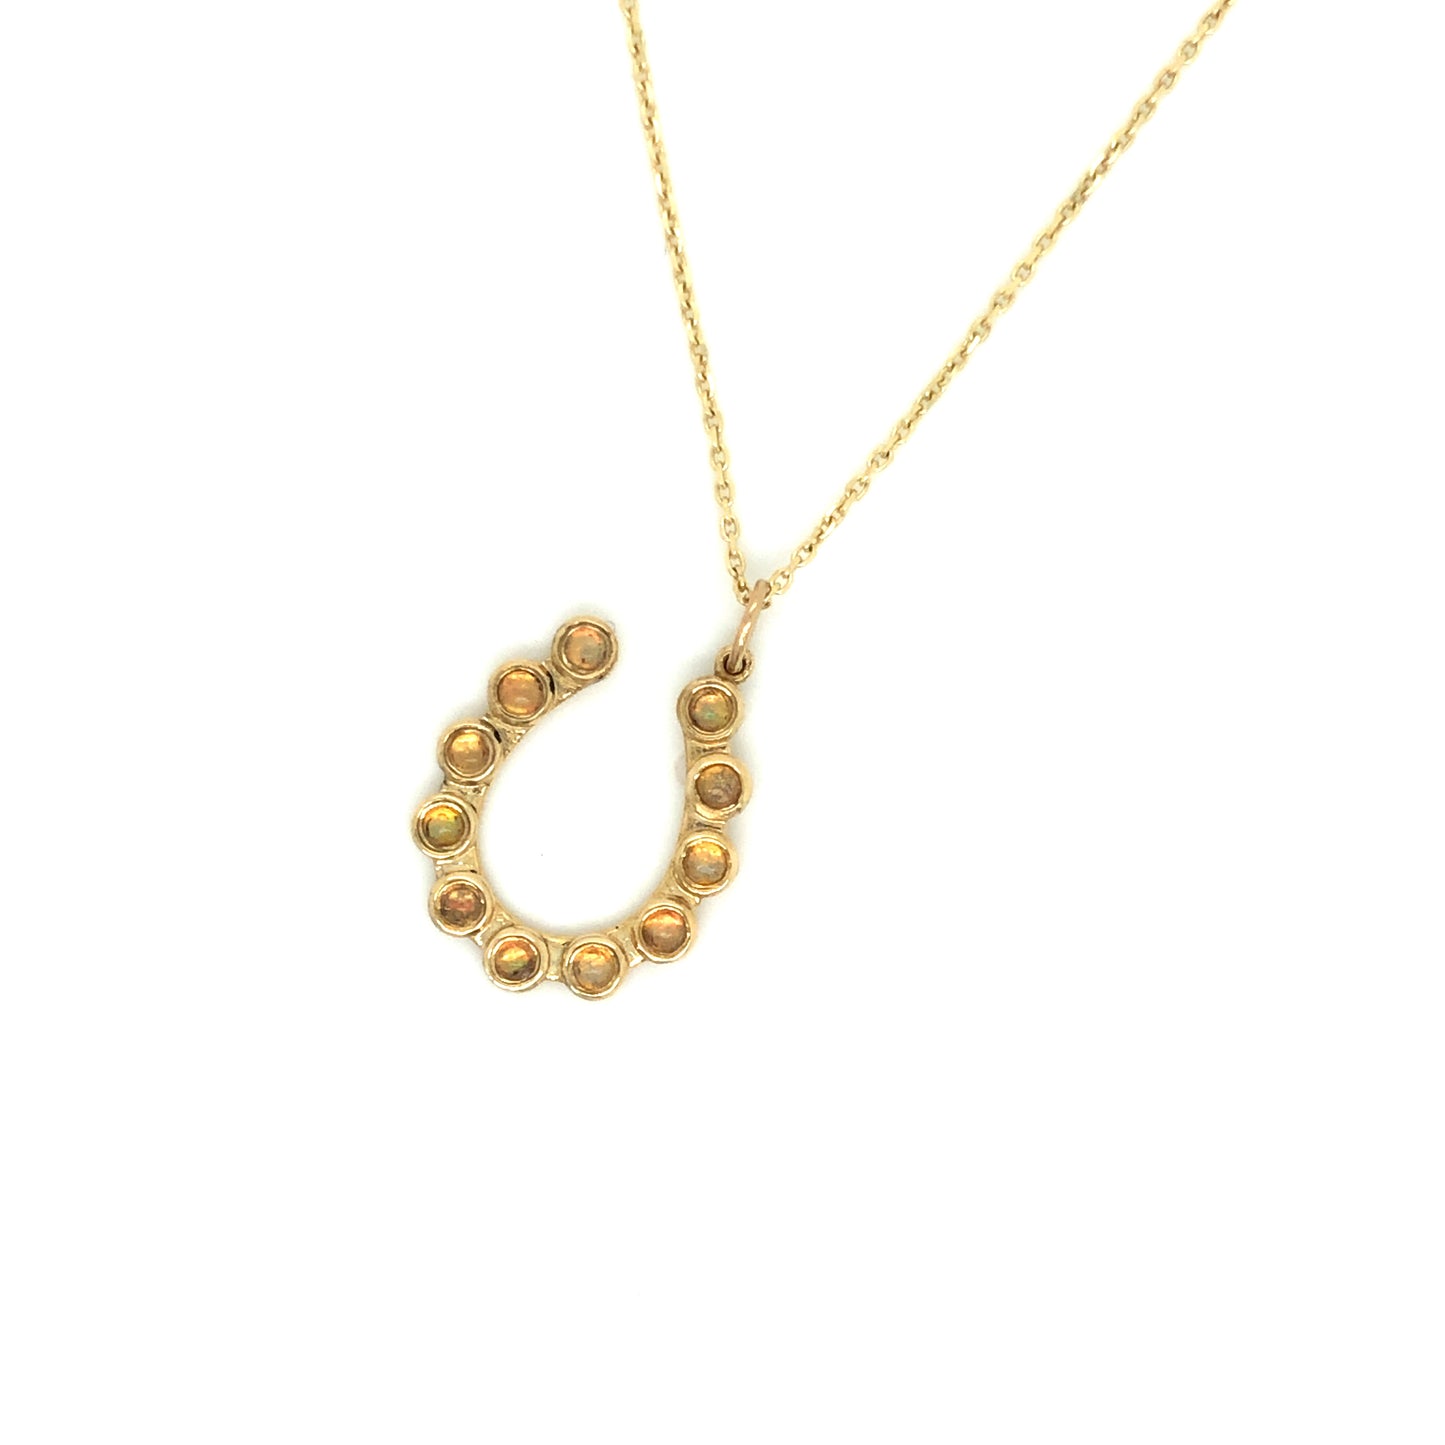 IMMEDIATE DELIVERY / Opal Horseshoe Necklace / 14k Yellow Gold